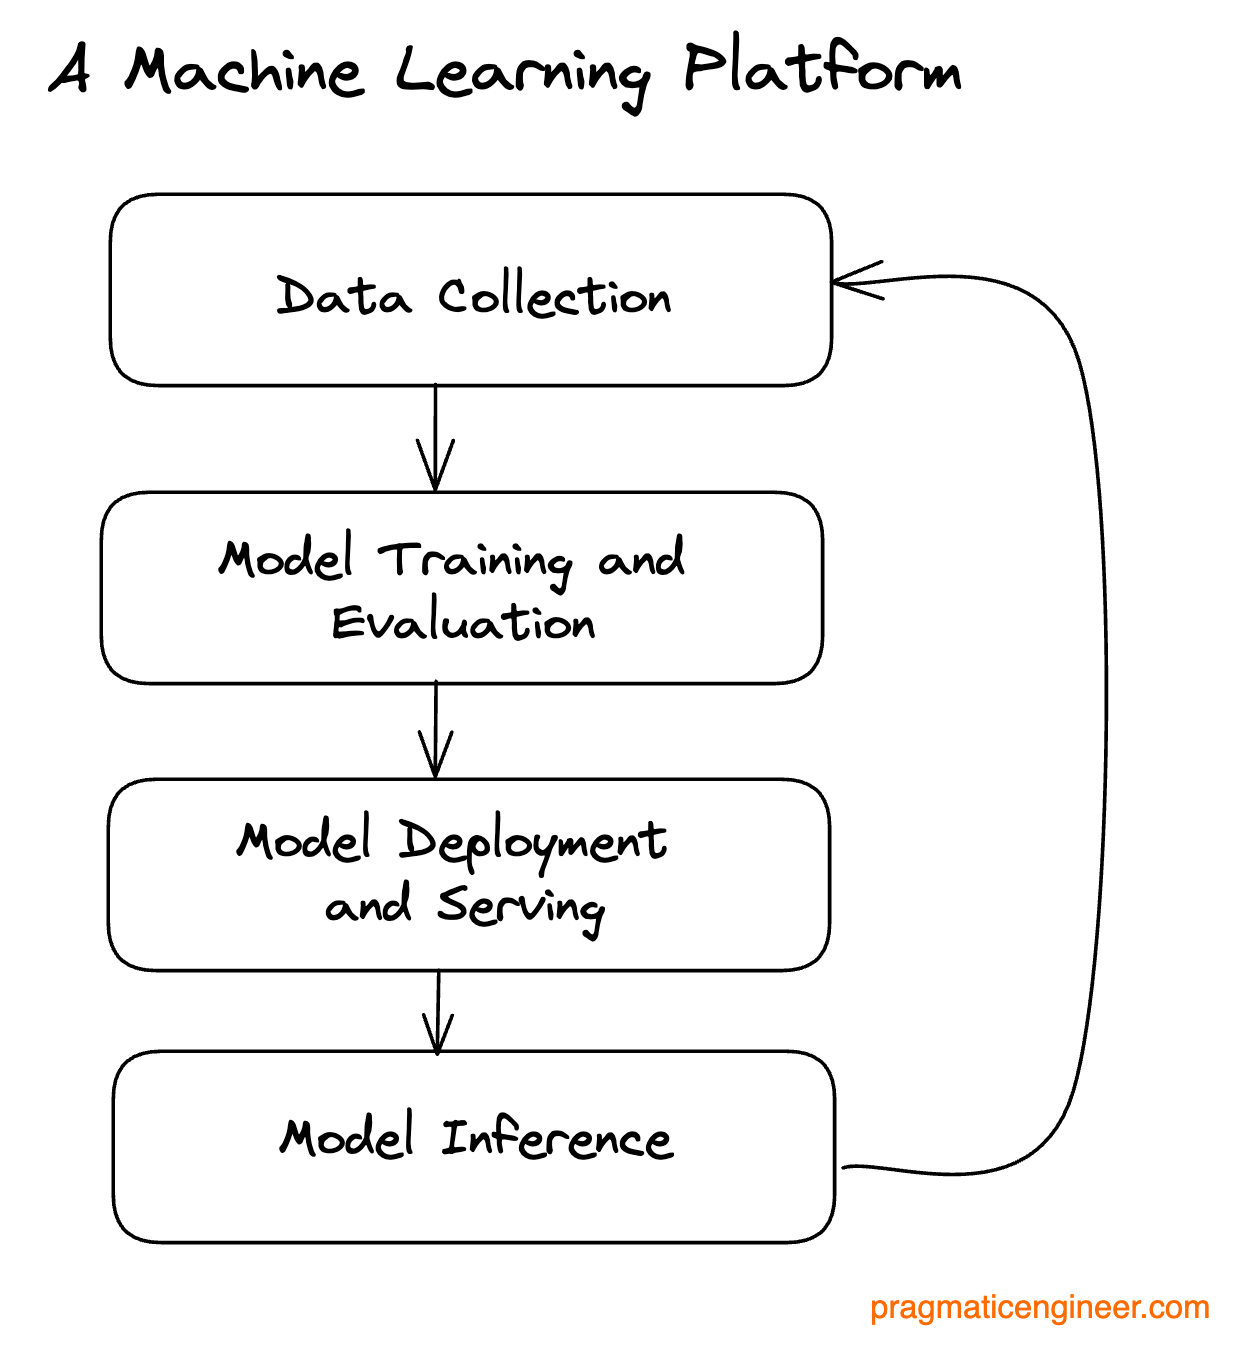 Typical components within a machine learning platform